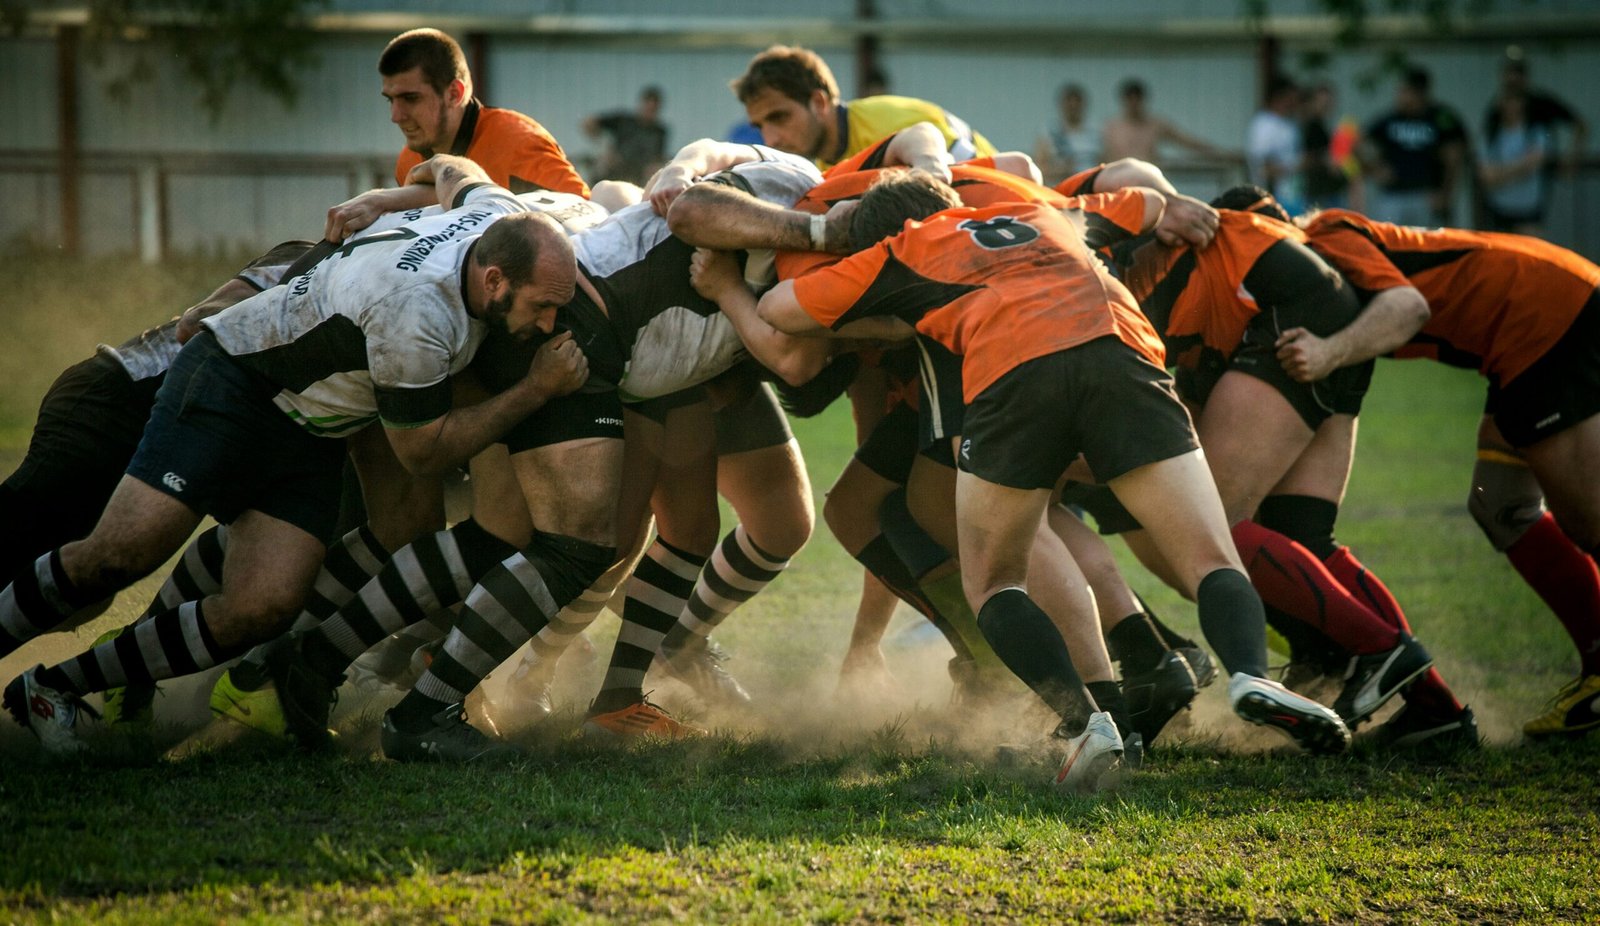 The Best Rugby Teams to Bet on in Australia